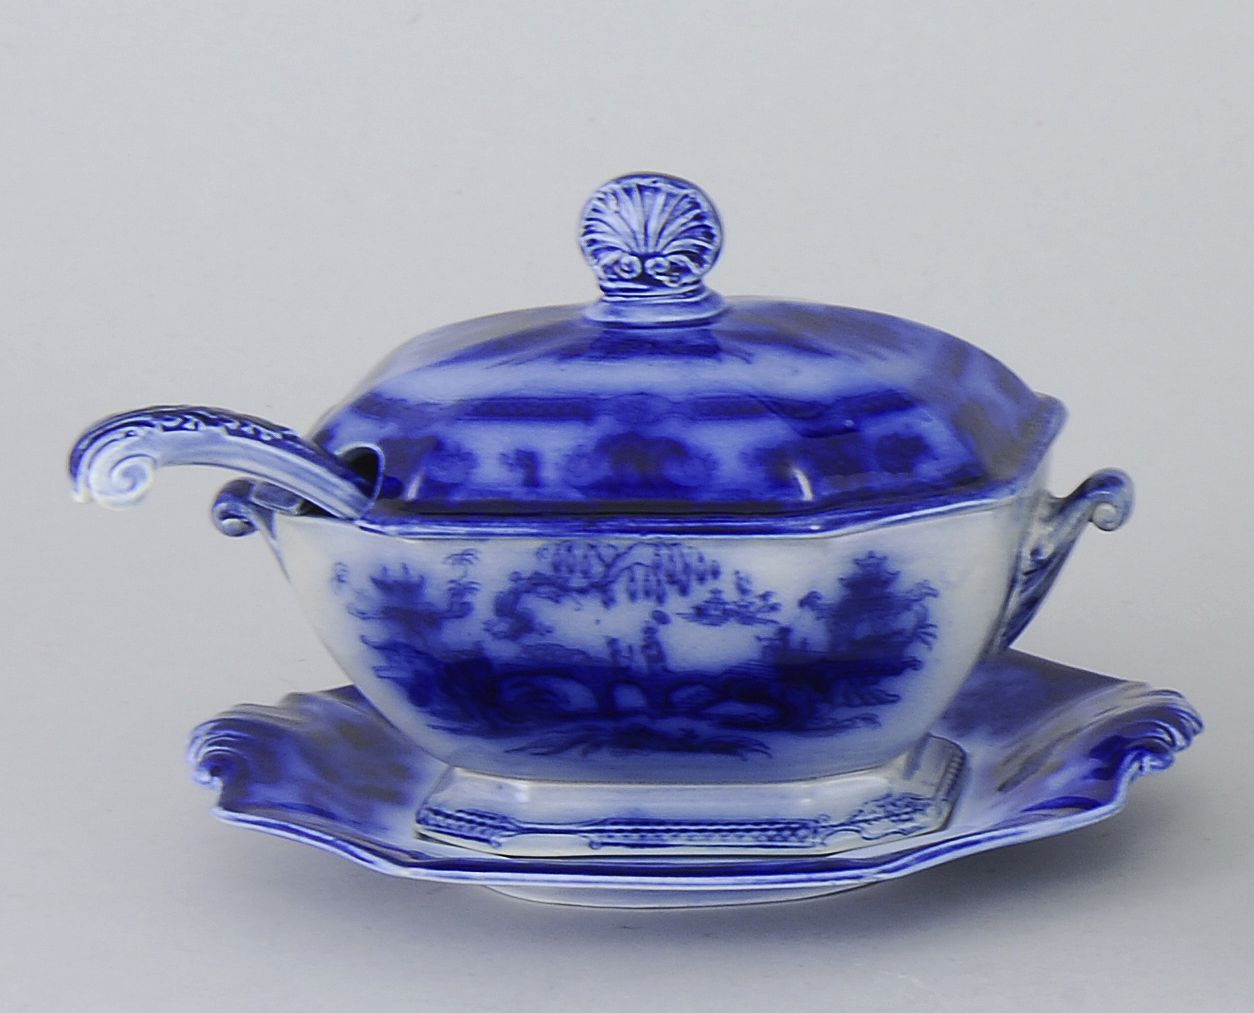 FLOW BLUE SAUCE TUREEN WITH LADLE AND